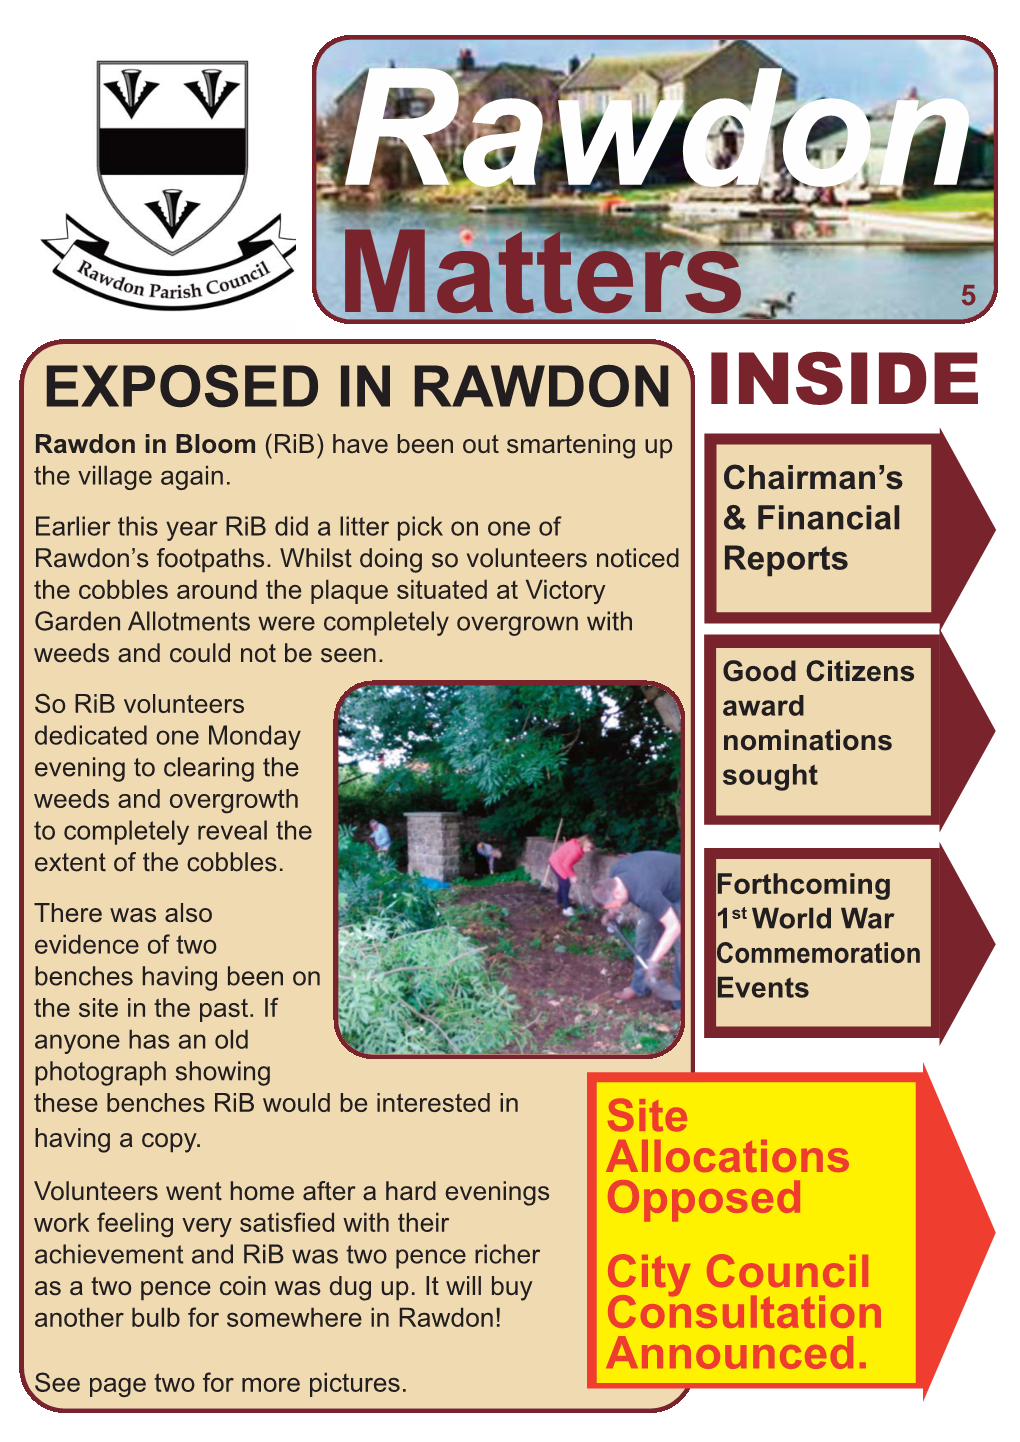 Matters 5 EXPOSED in RAWDON INSIDE Rawdon in Bloom (Rib) Have Been out Smartening up the Village Again